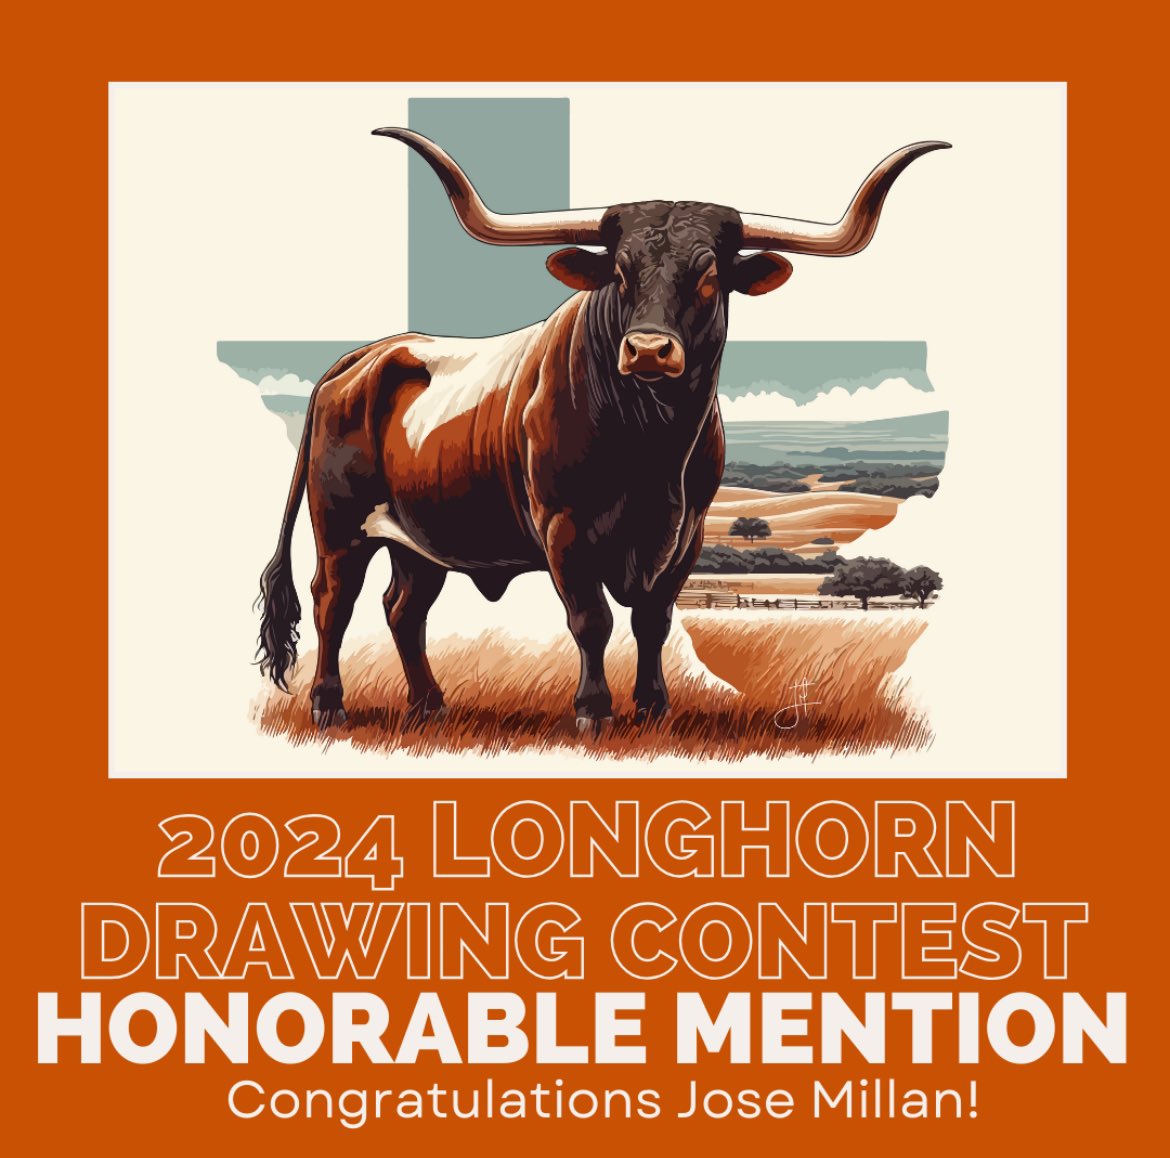 Thank you for all the artwork submissions and Congratulations again to all the winners! If you won, please come to the UT Campus Computer Store to pick up your prize! Thank you to all who participated! #Longhorns #Hookem #Artists #UTAustin #UT28 #UT27 #UT26 #UT25 #UT24